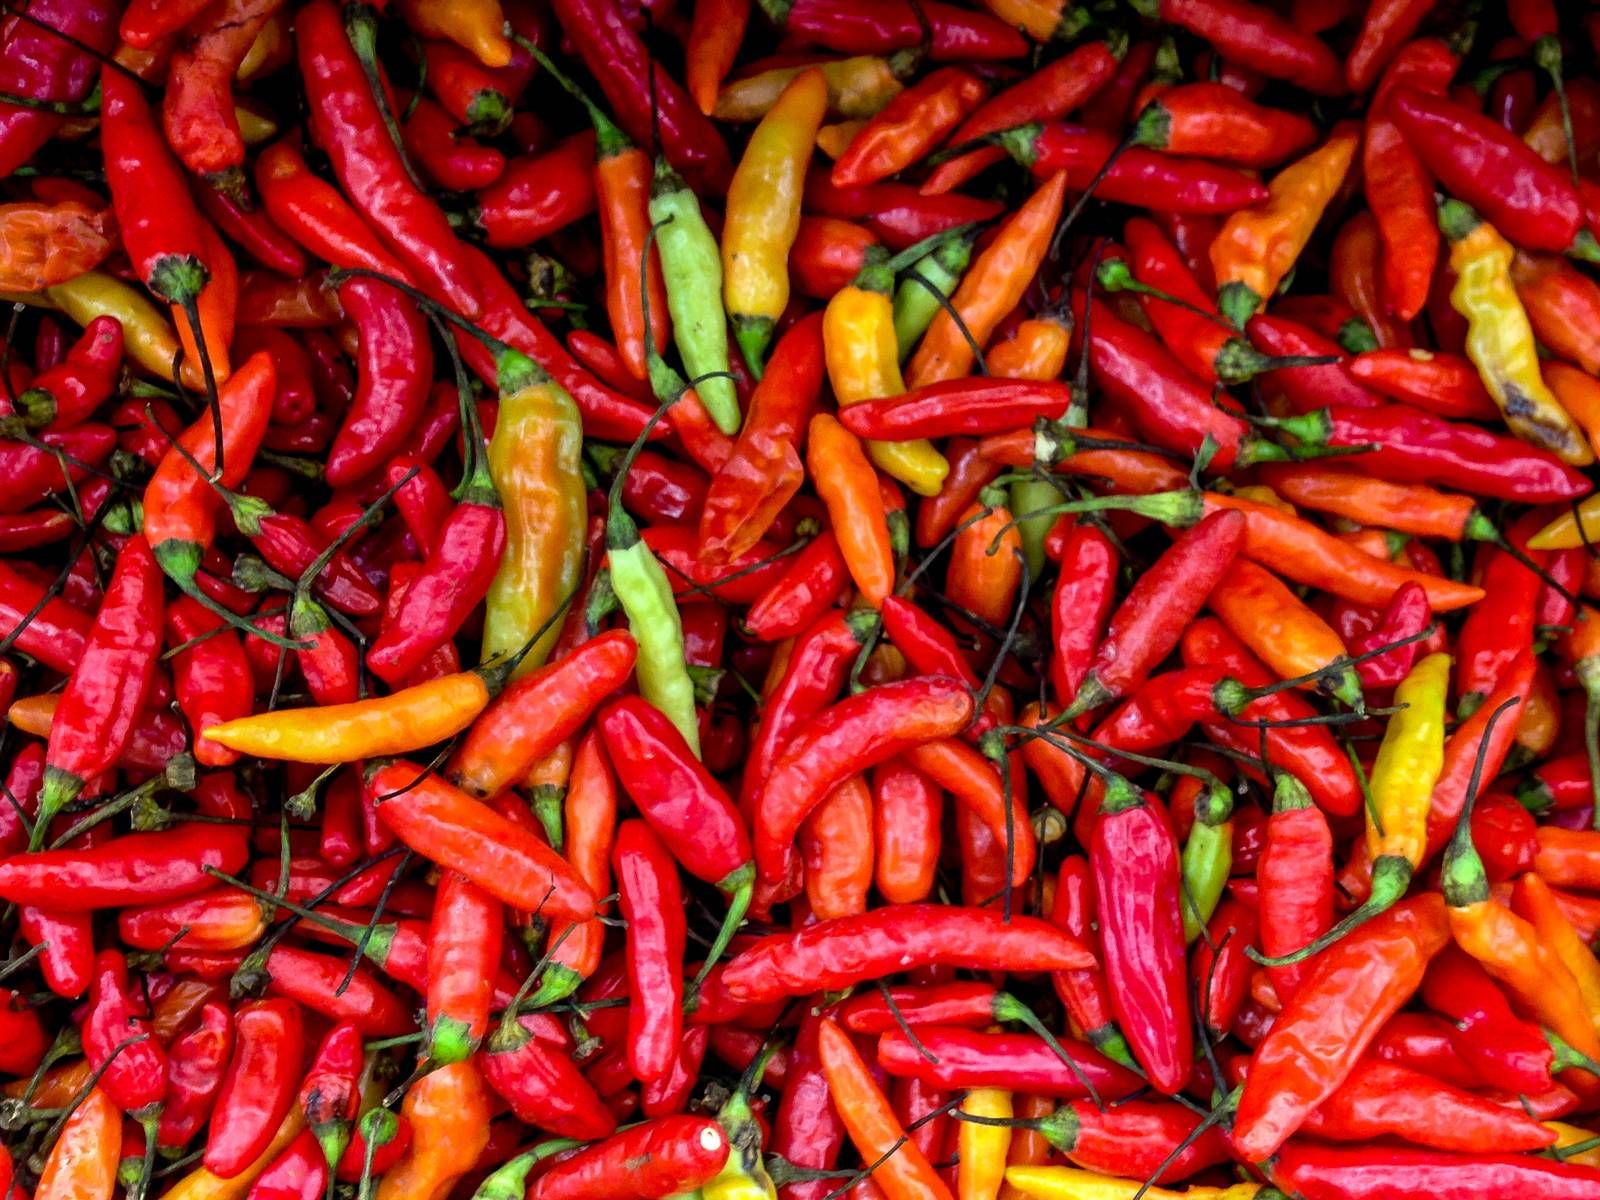 There are a wide variety of hot peppers you can grow in your own garden.